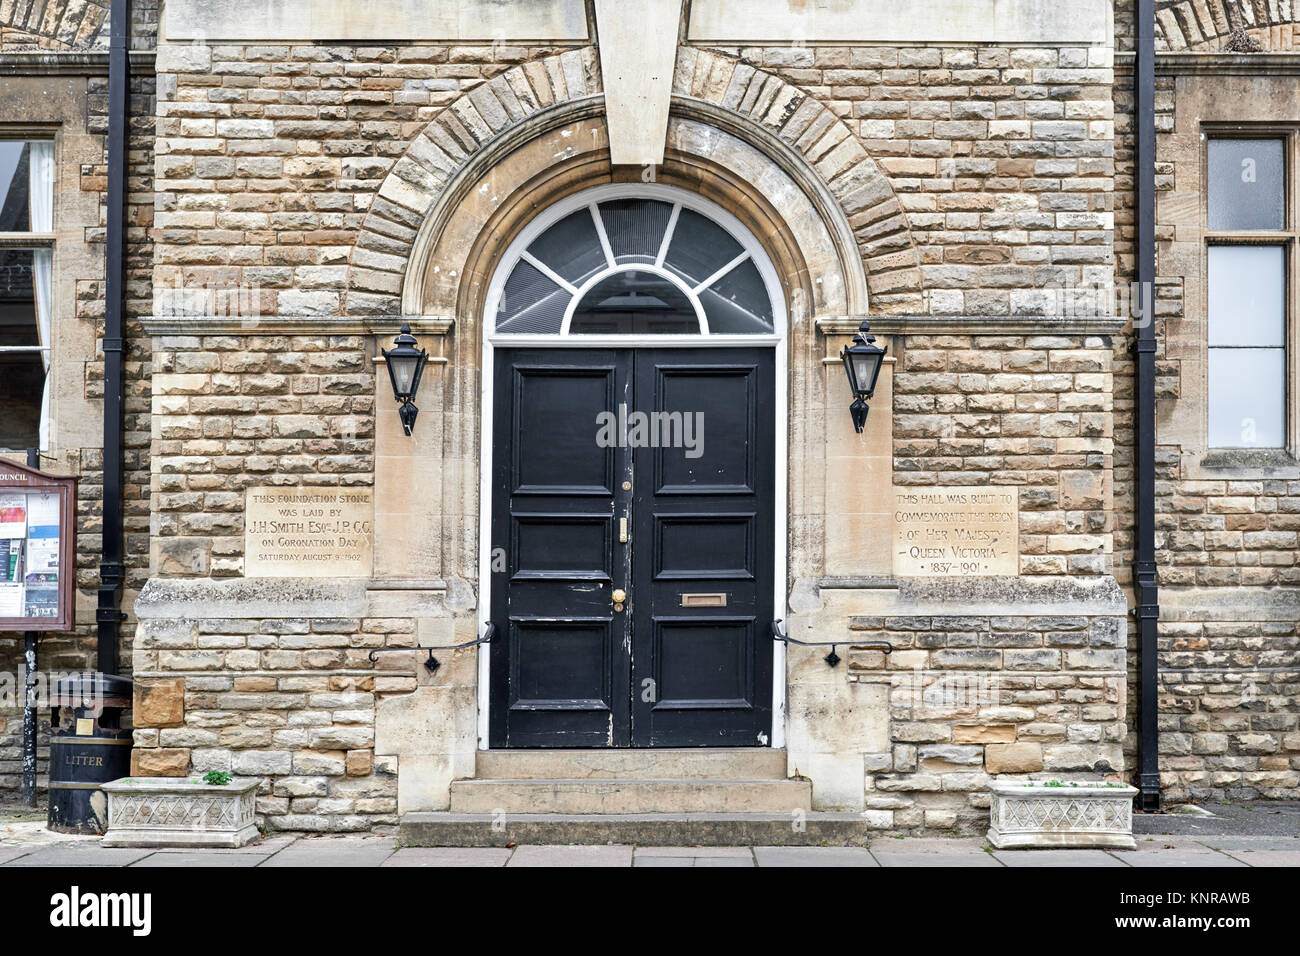 Entrance to the Council building (built 1902 to commemeorate the  reign of queen Victoria)at the country town of Oundle, Northamptonshire, England. Stock Photo